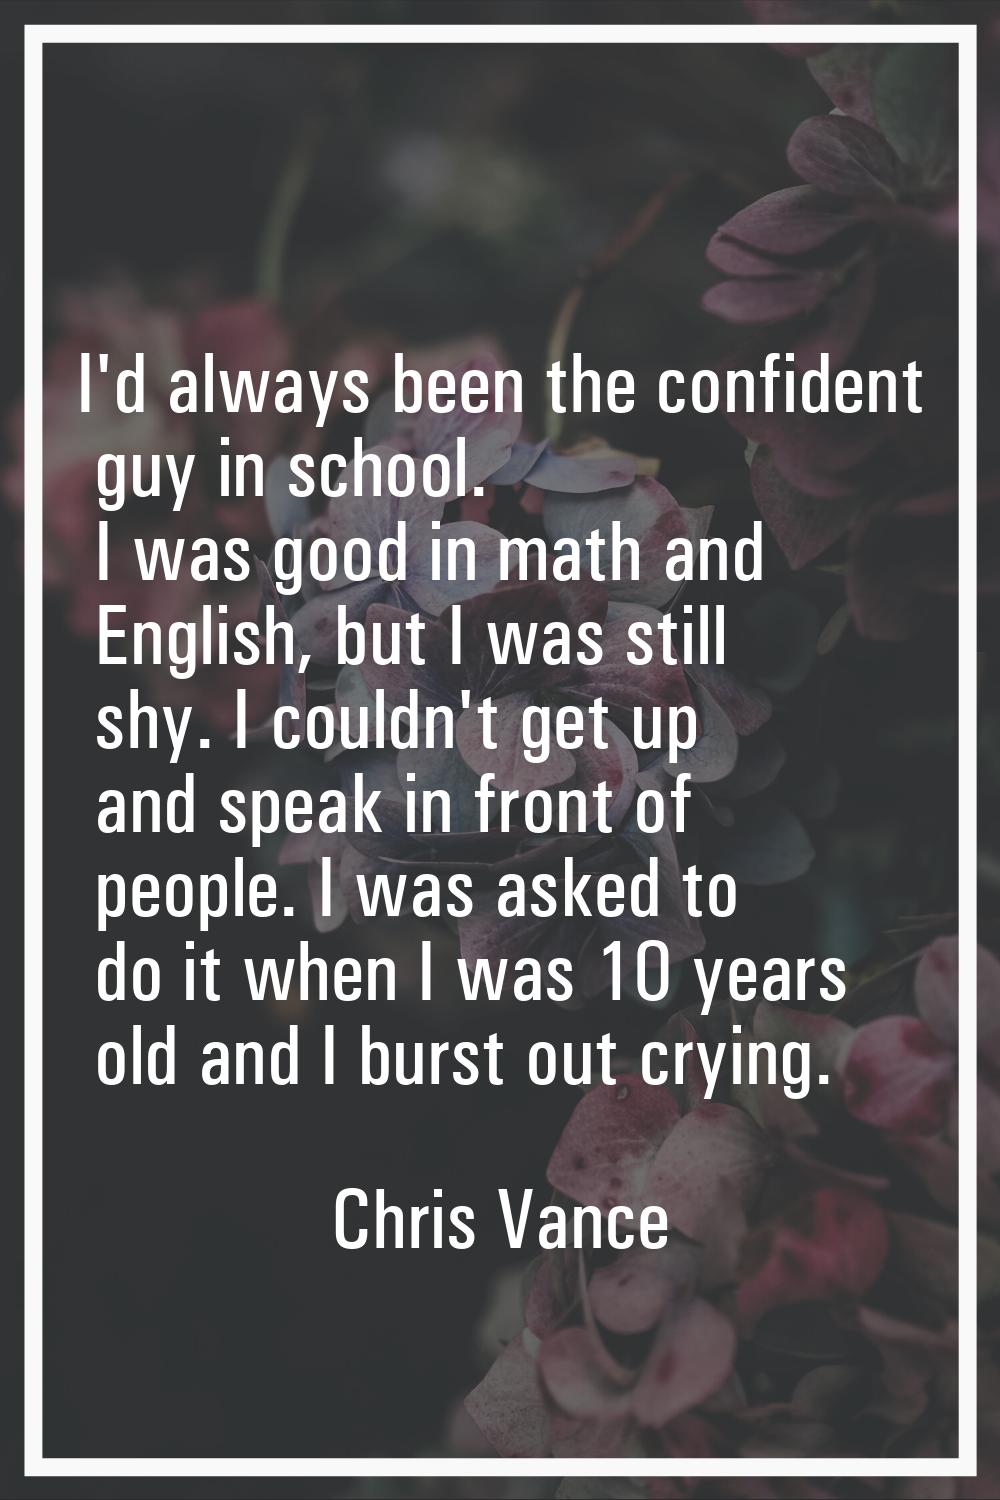 I'd always been the confident guy in school. I was good in math and English, but I was still shy. I